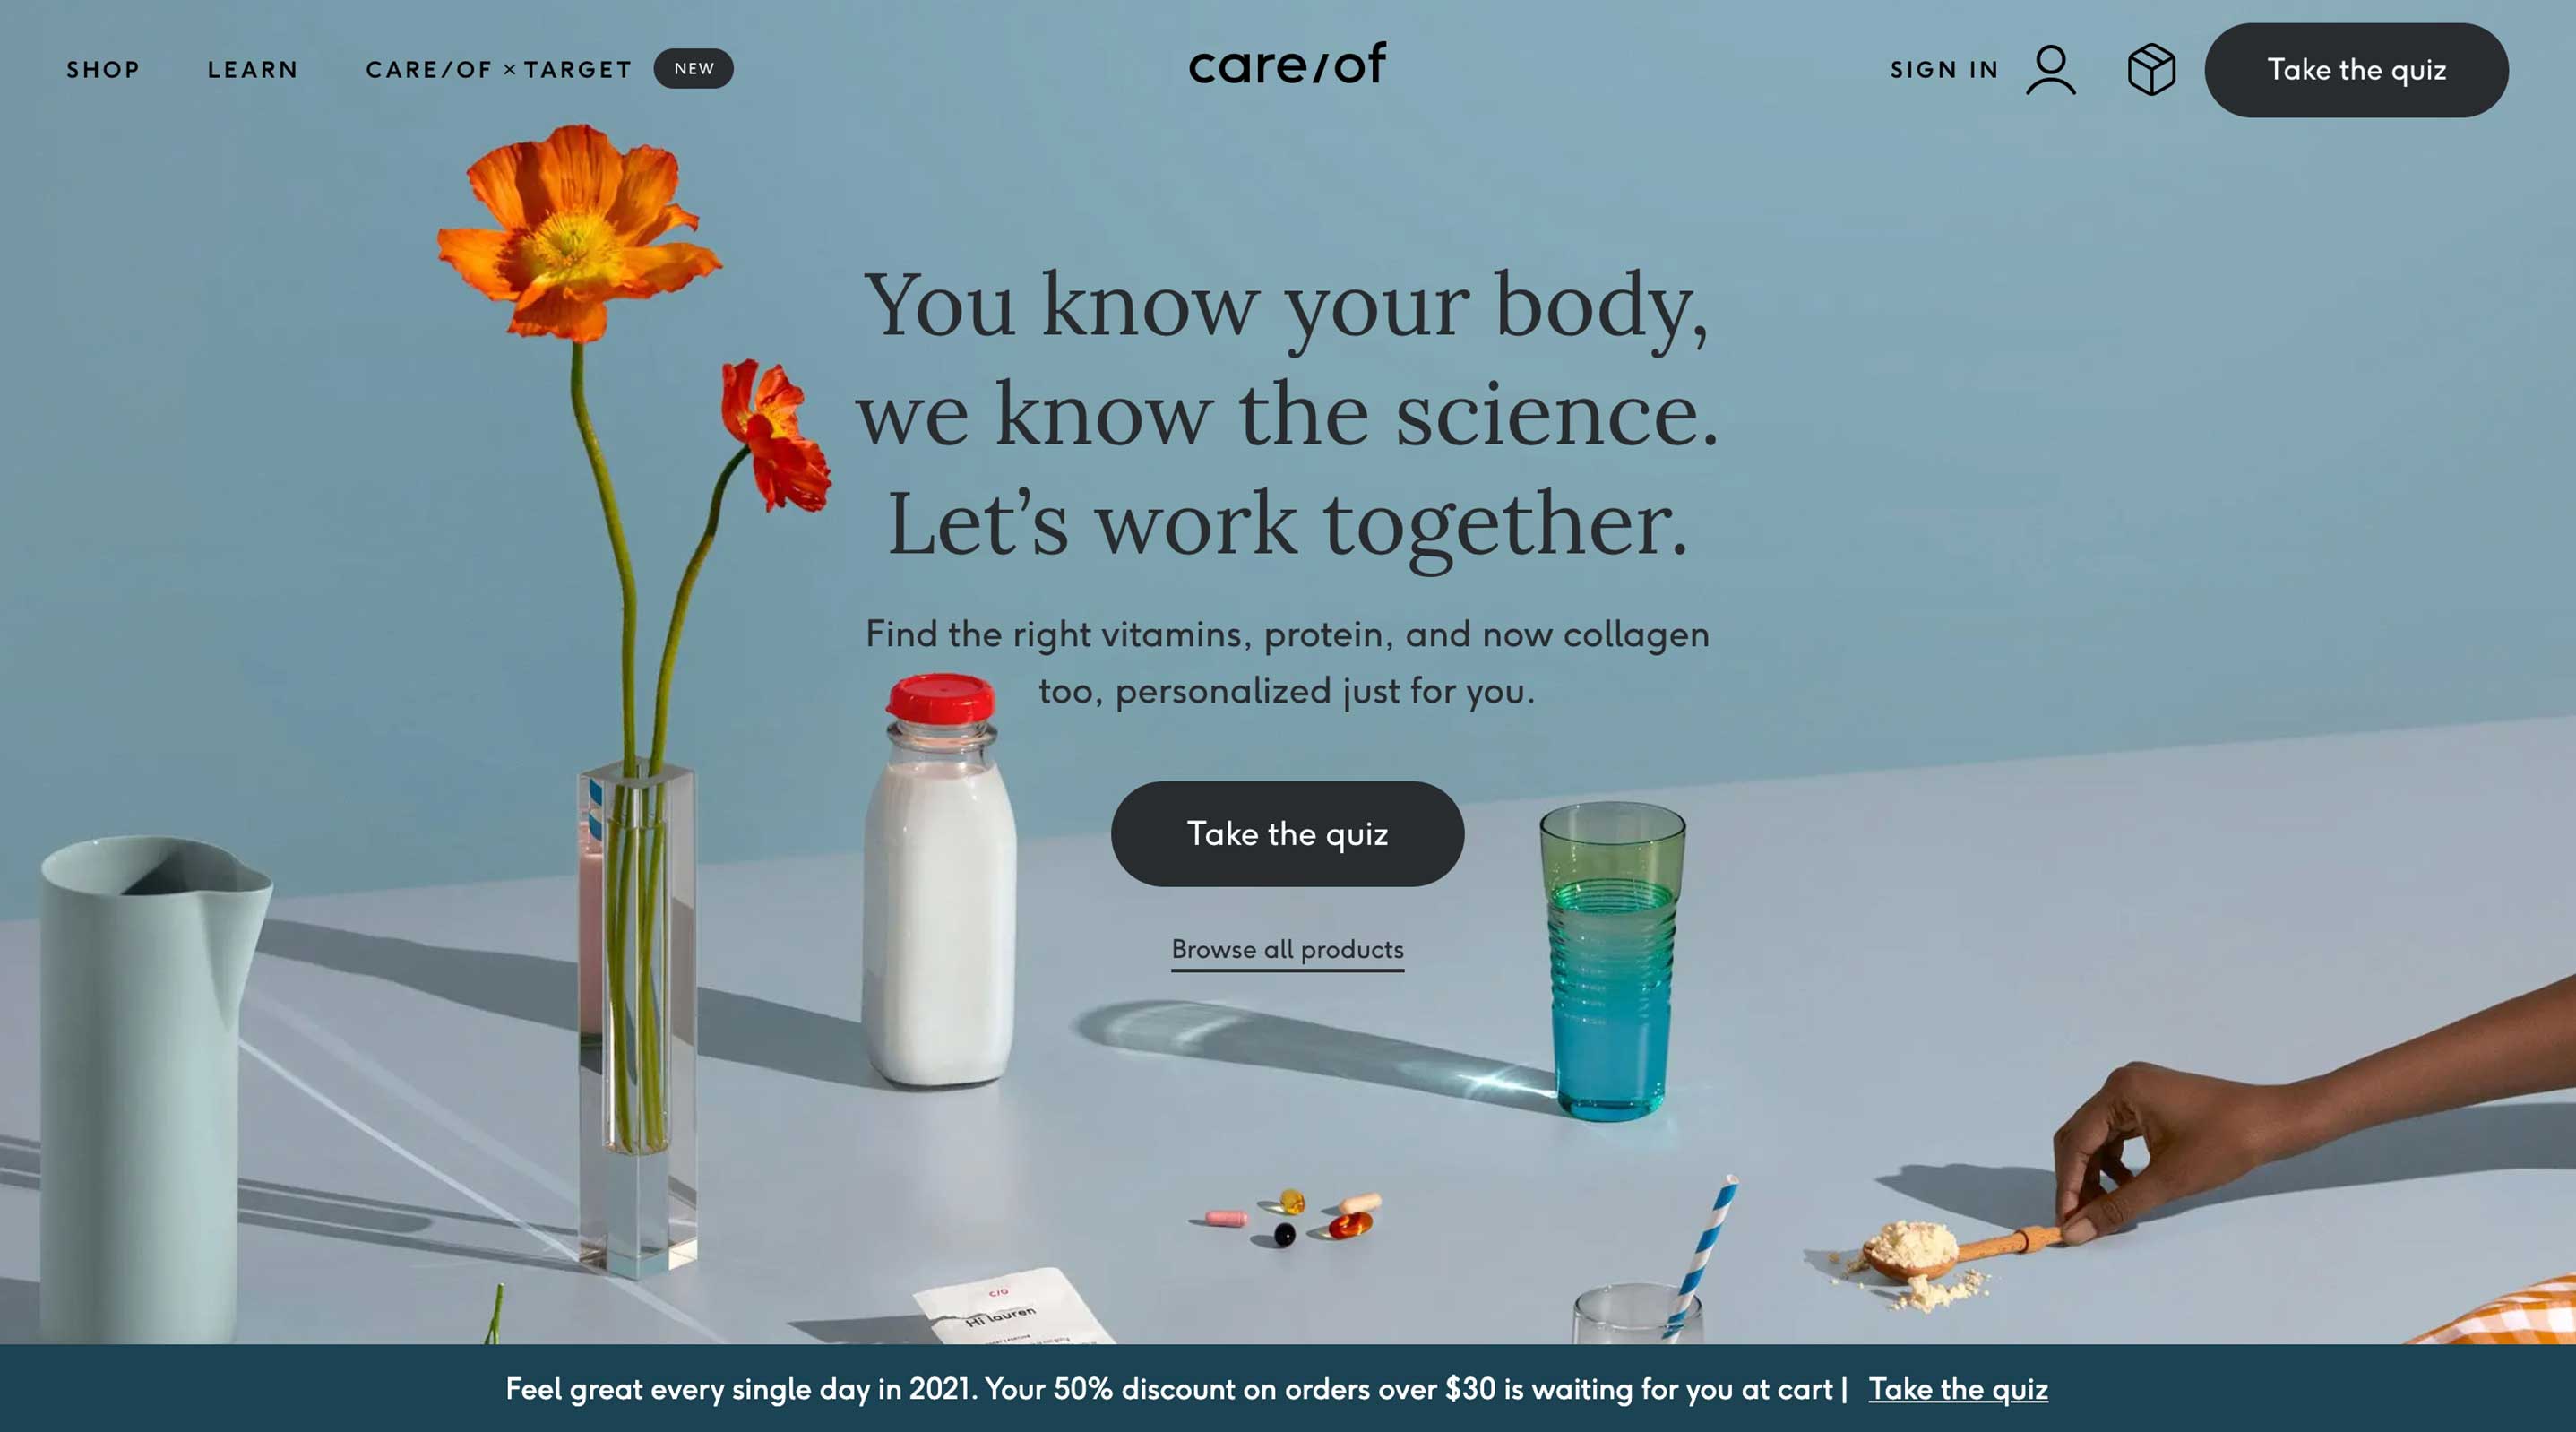 Takecareof.com, the site to create a personalized diet